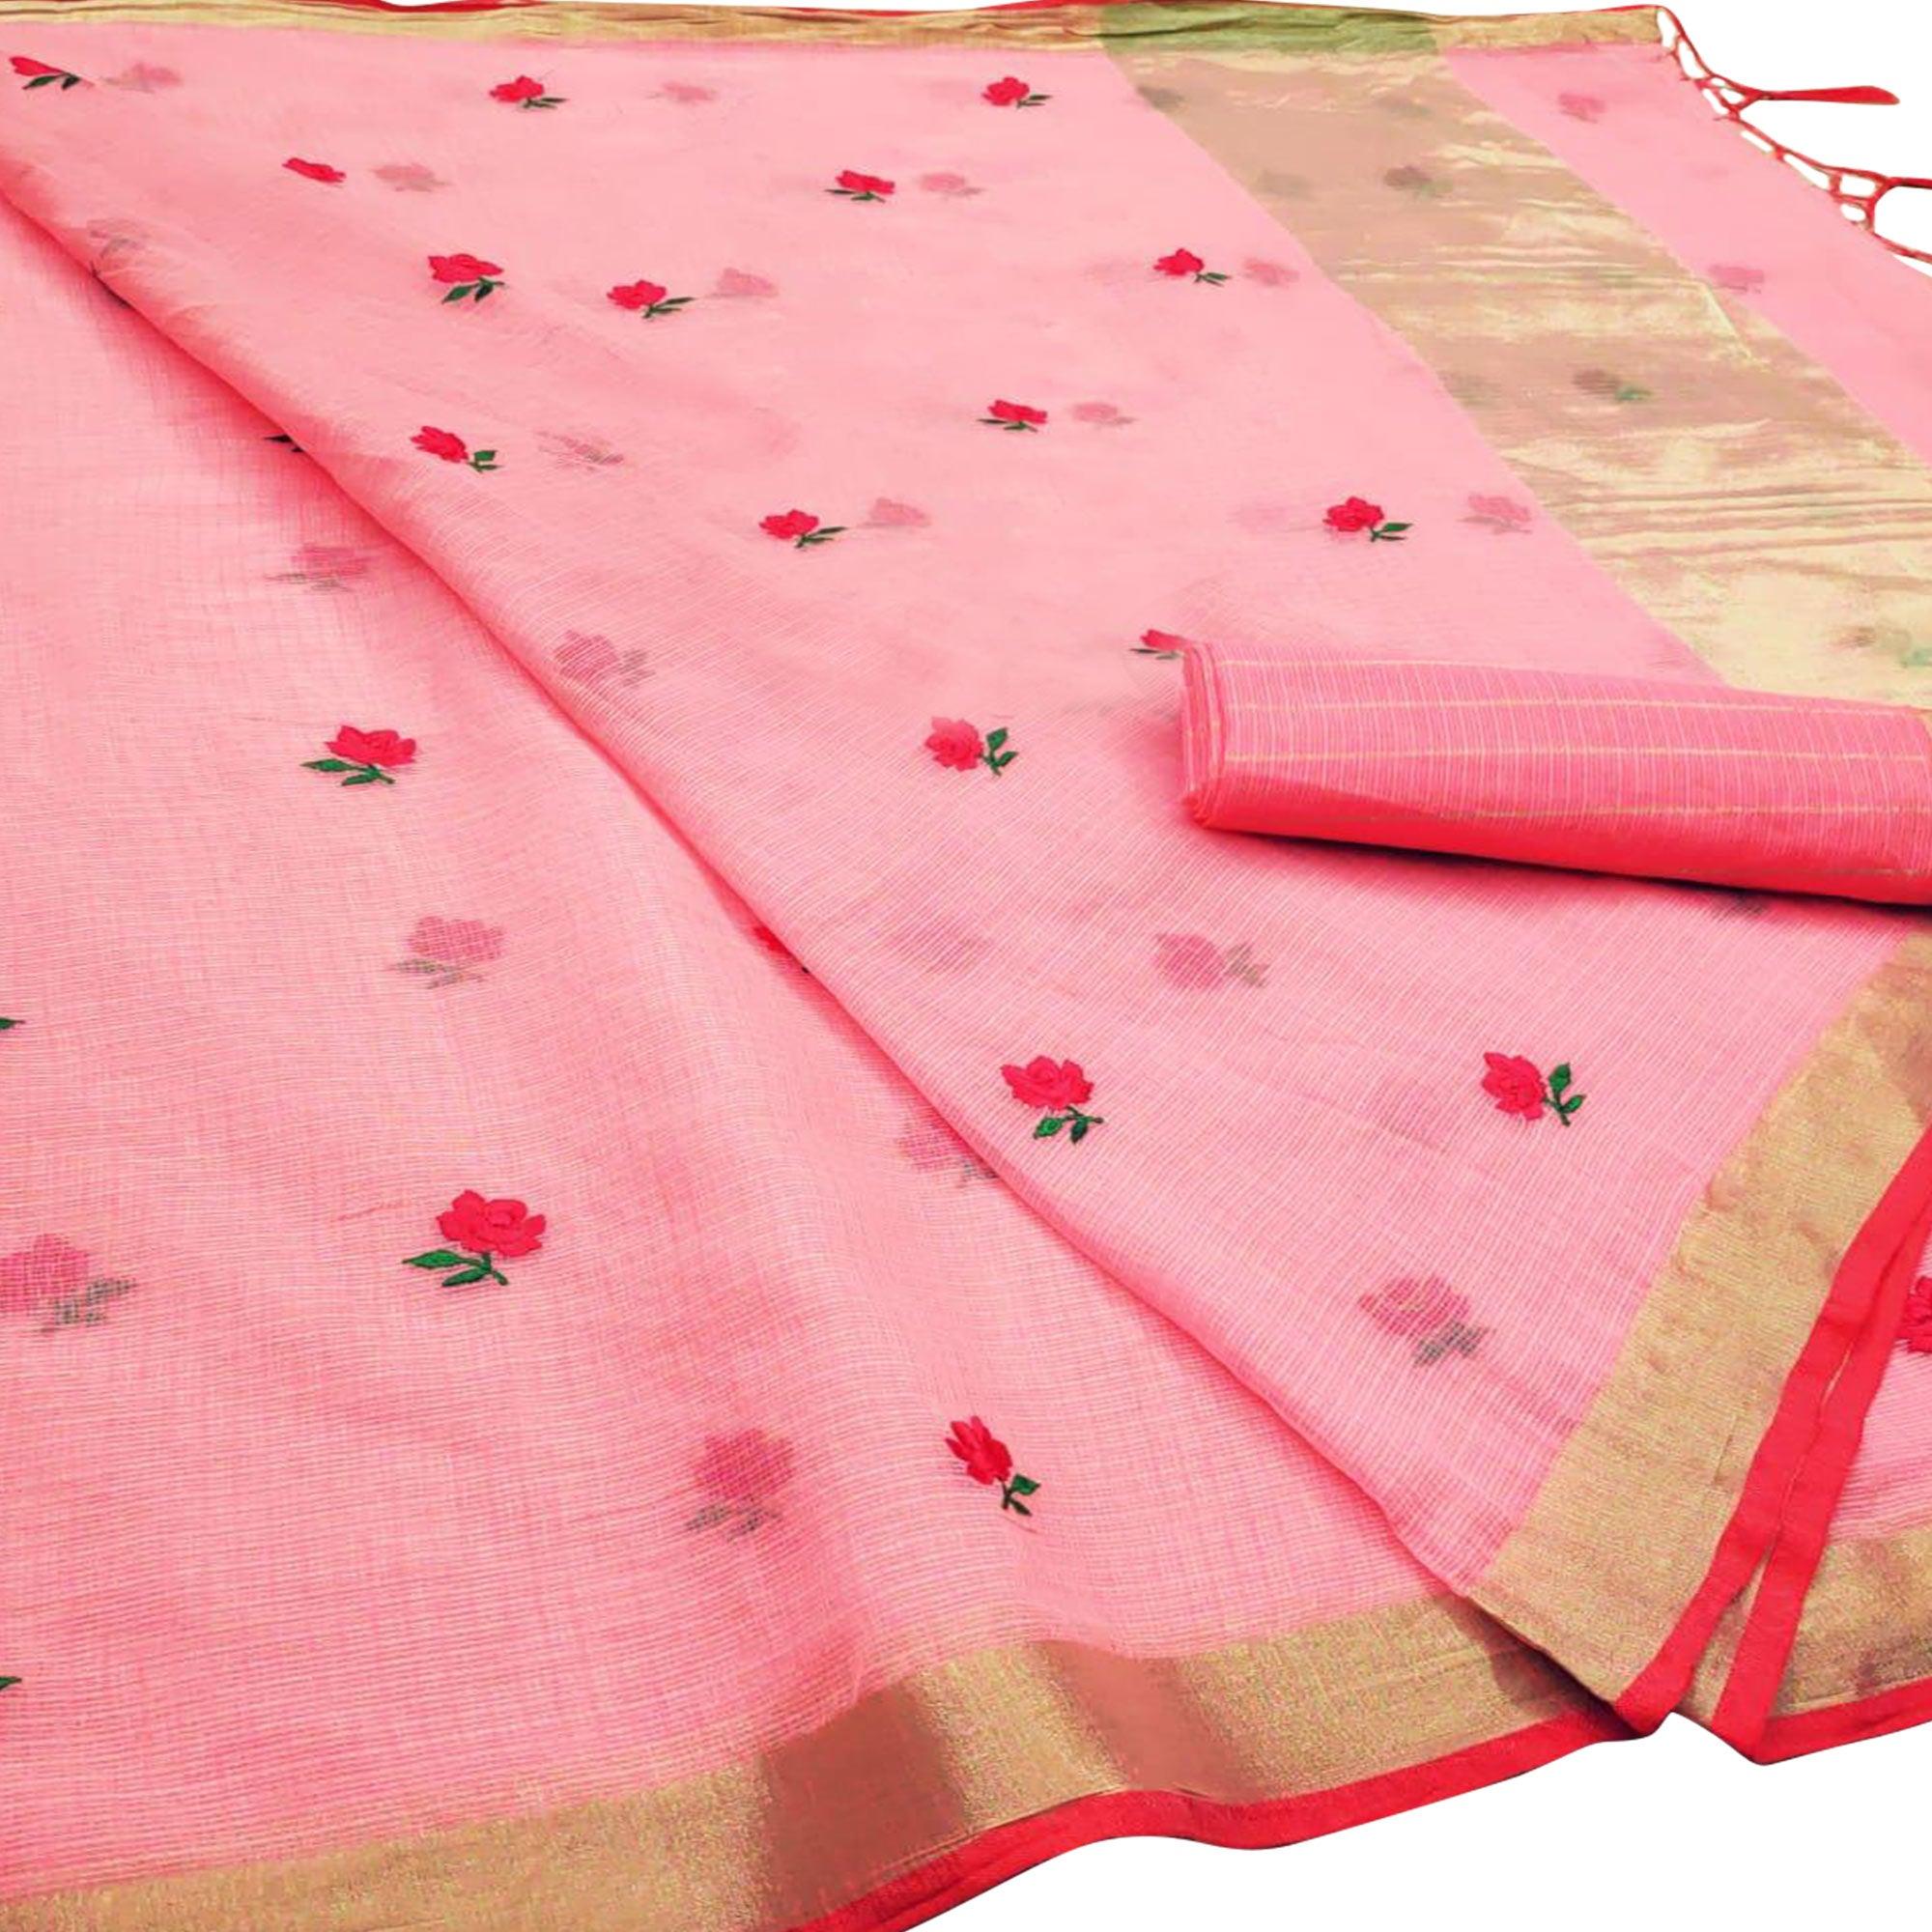 Classy Peach Colored Casual Wear Floral Embroidered Silk Saree With Tassels - Peachmode